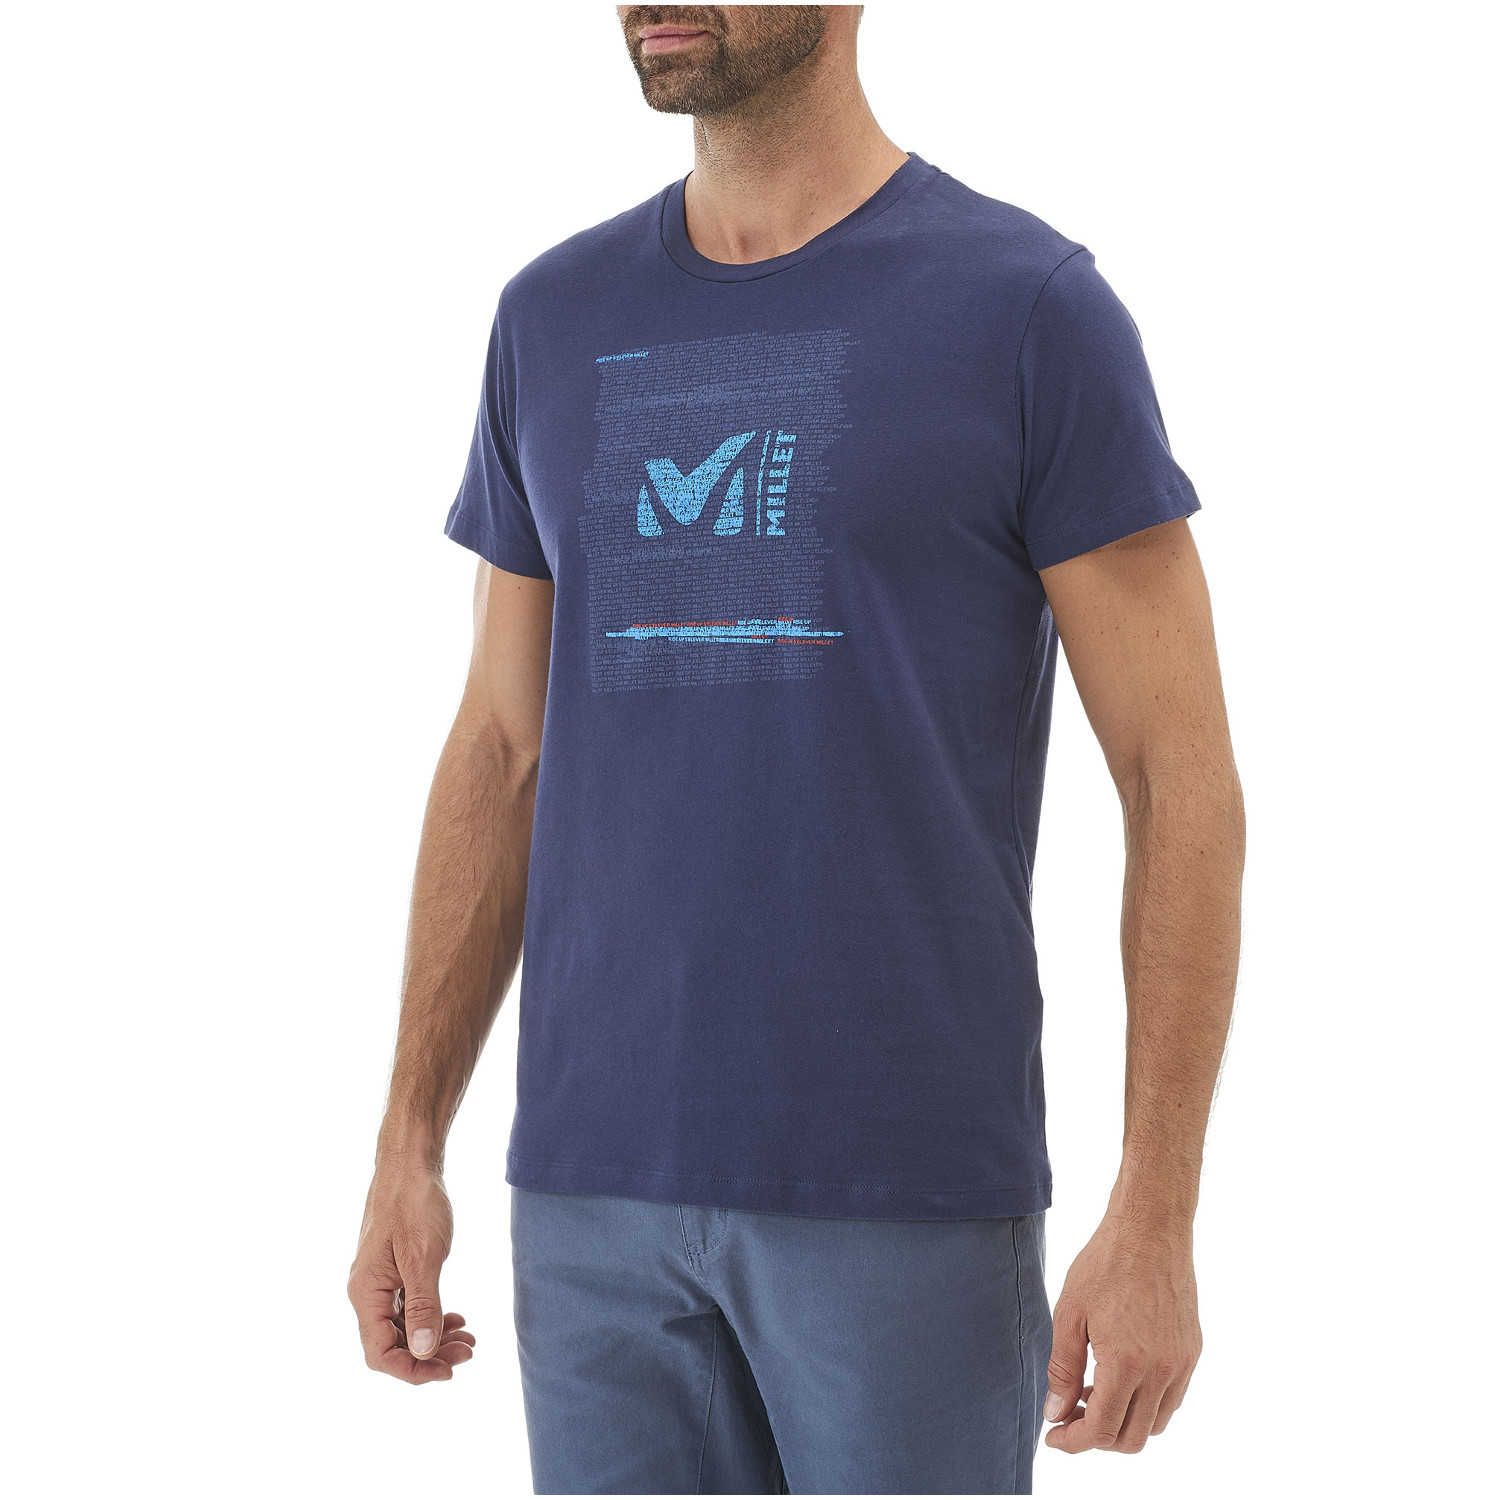 Escalade - Tee-shirt homme - Marine MILLET RISE UP TS SS